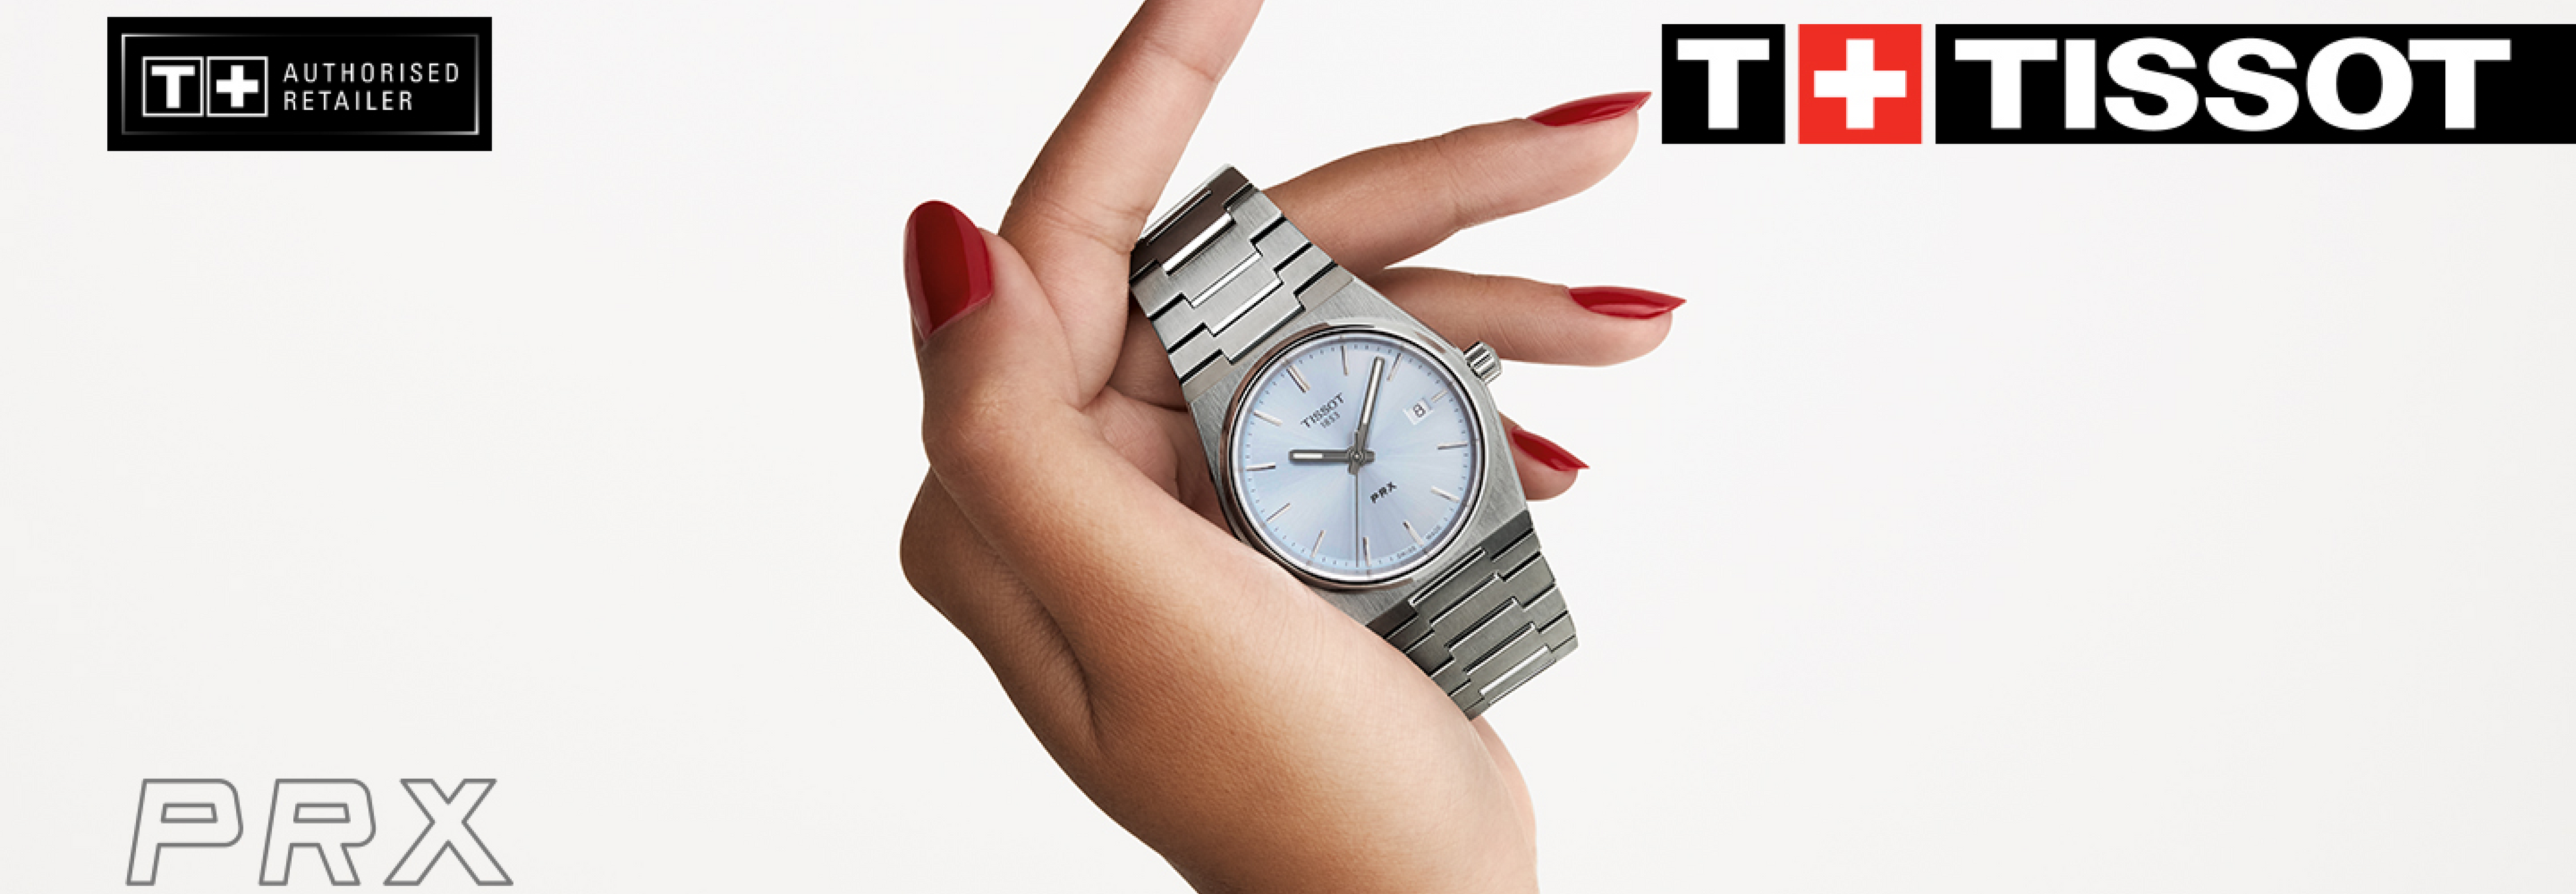 Tissot Watches, buy online in the Philippines